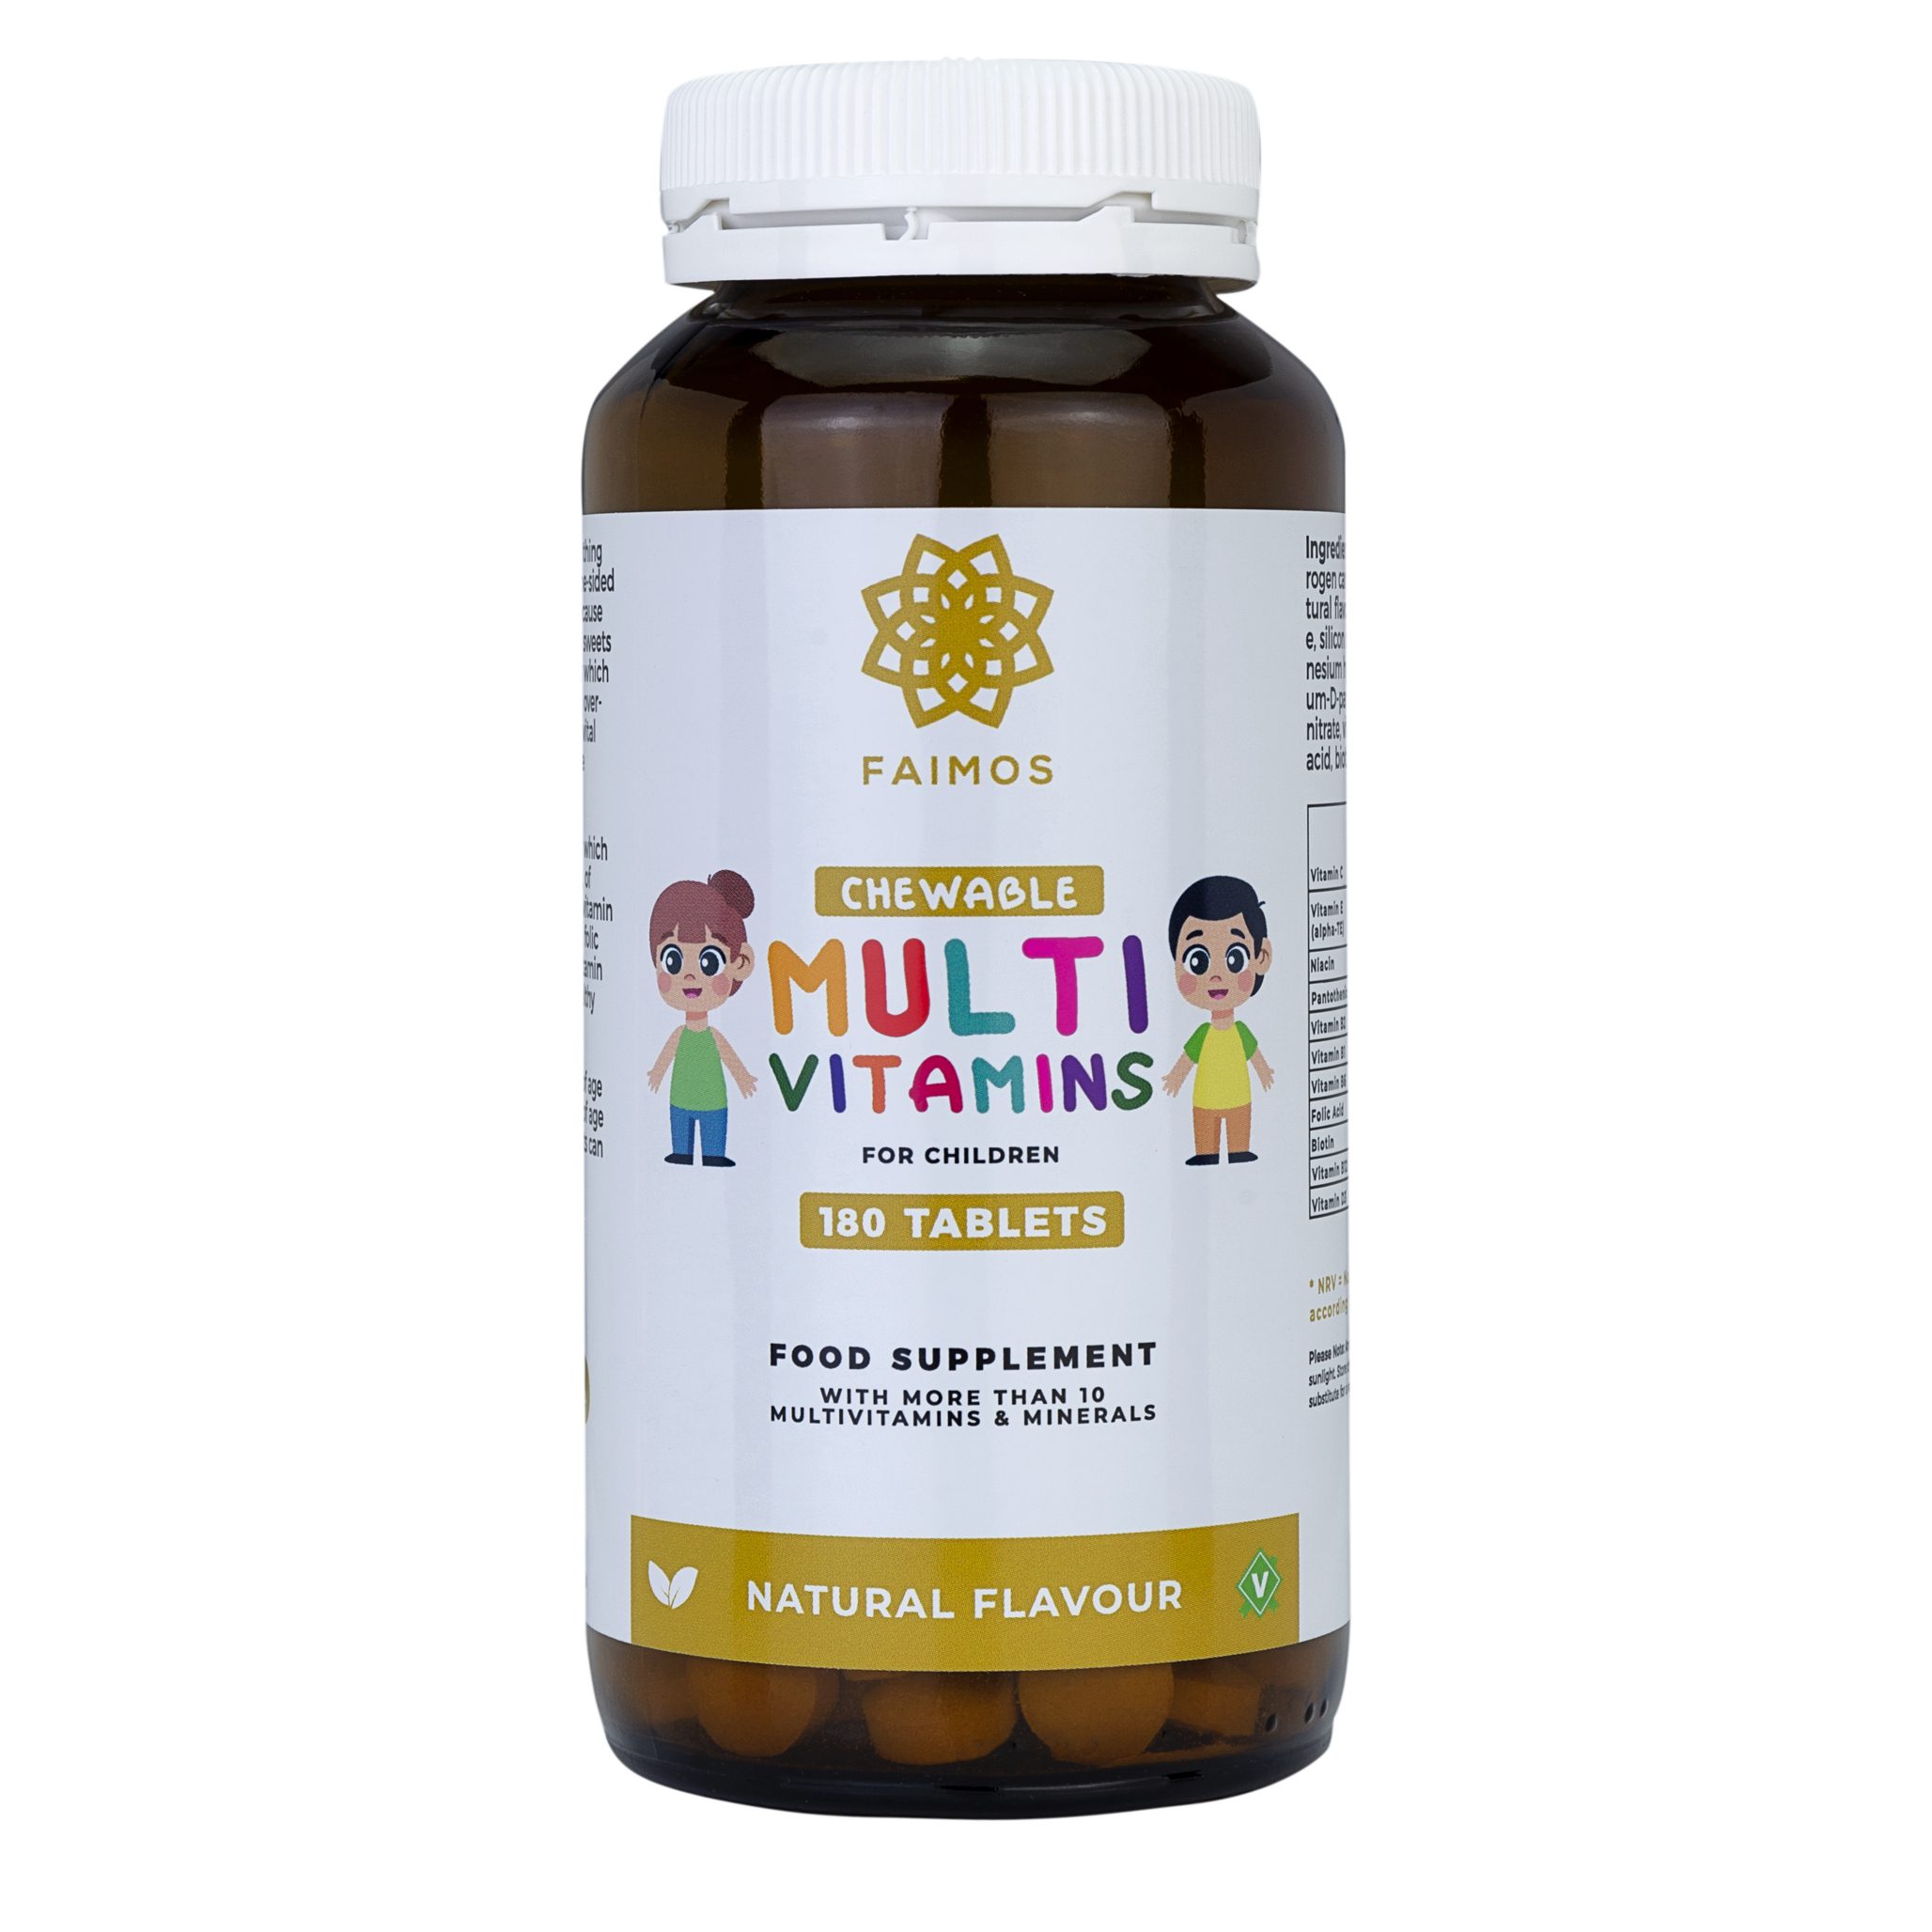 Faimos chewable multivitamin tablets for kids